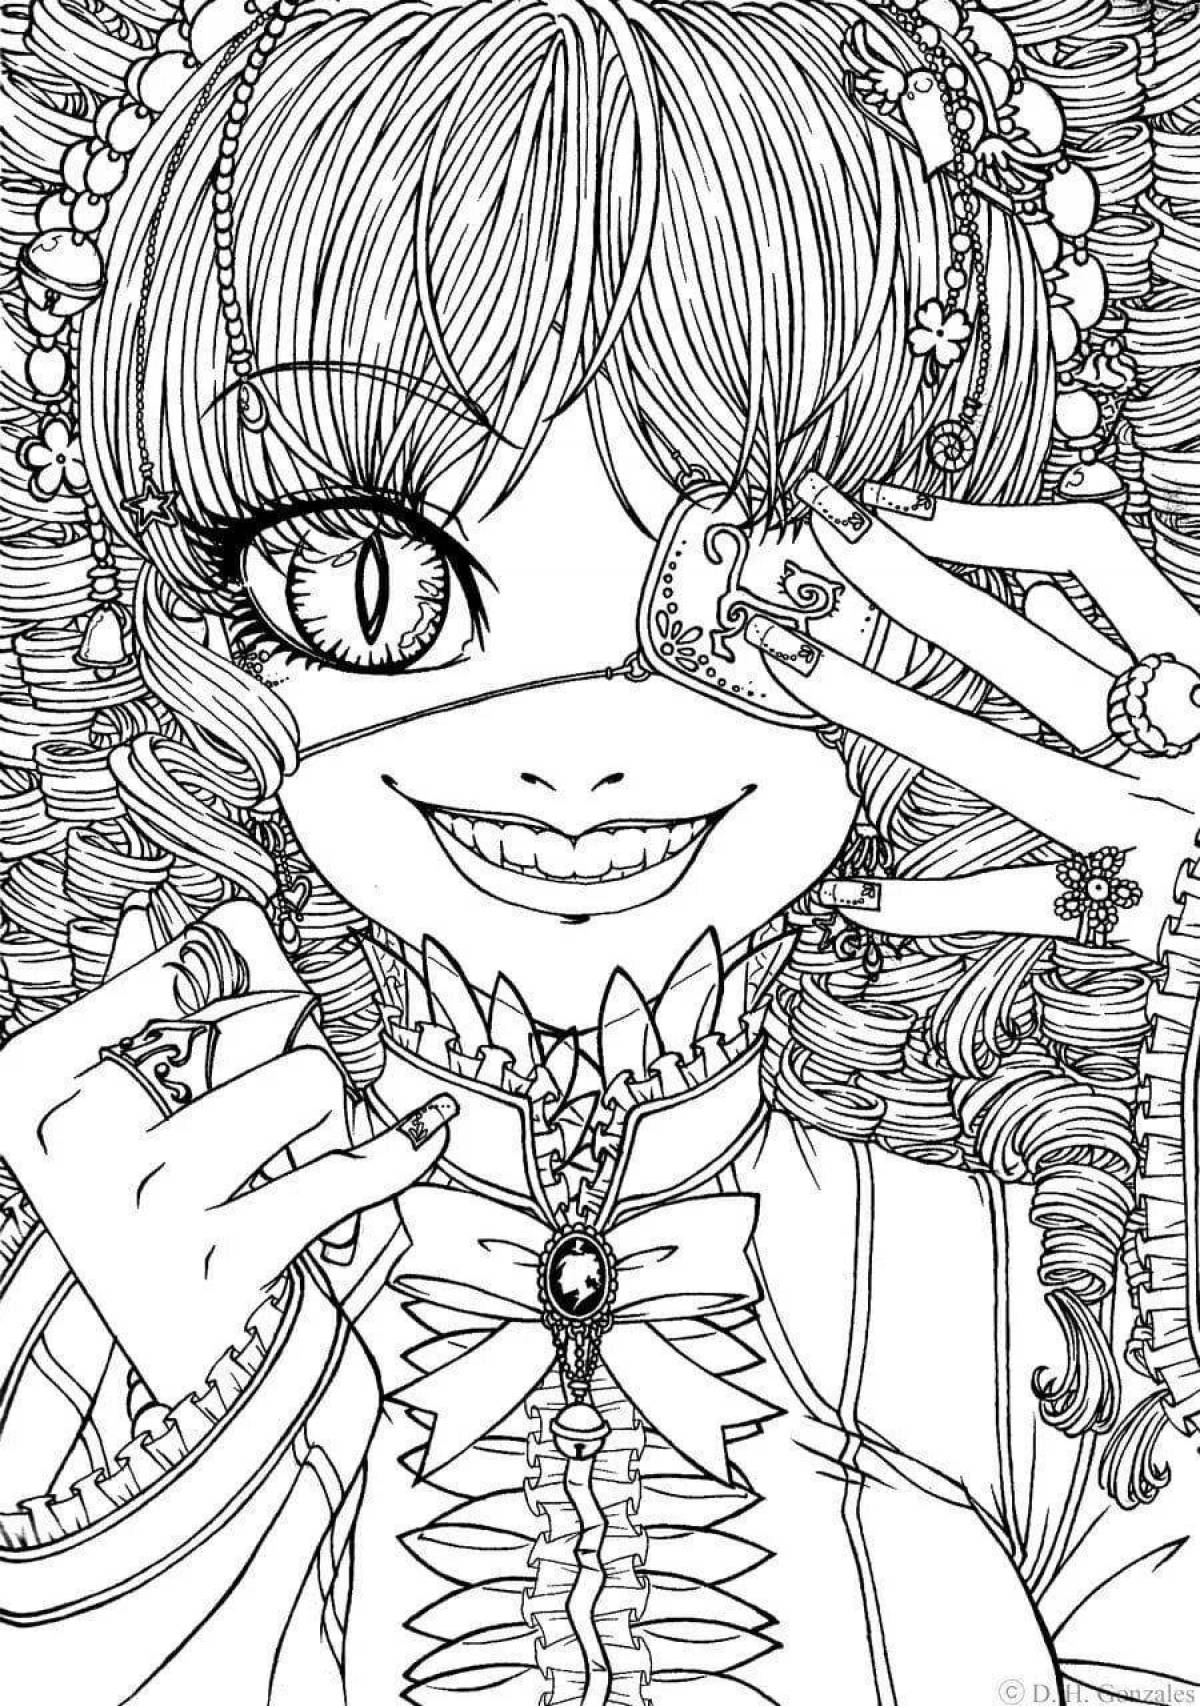 Calm antistress coloring book in anime style